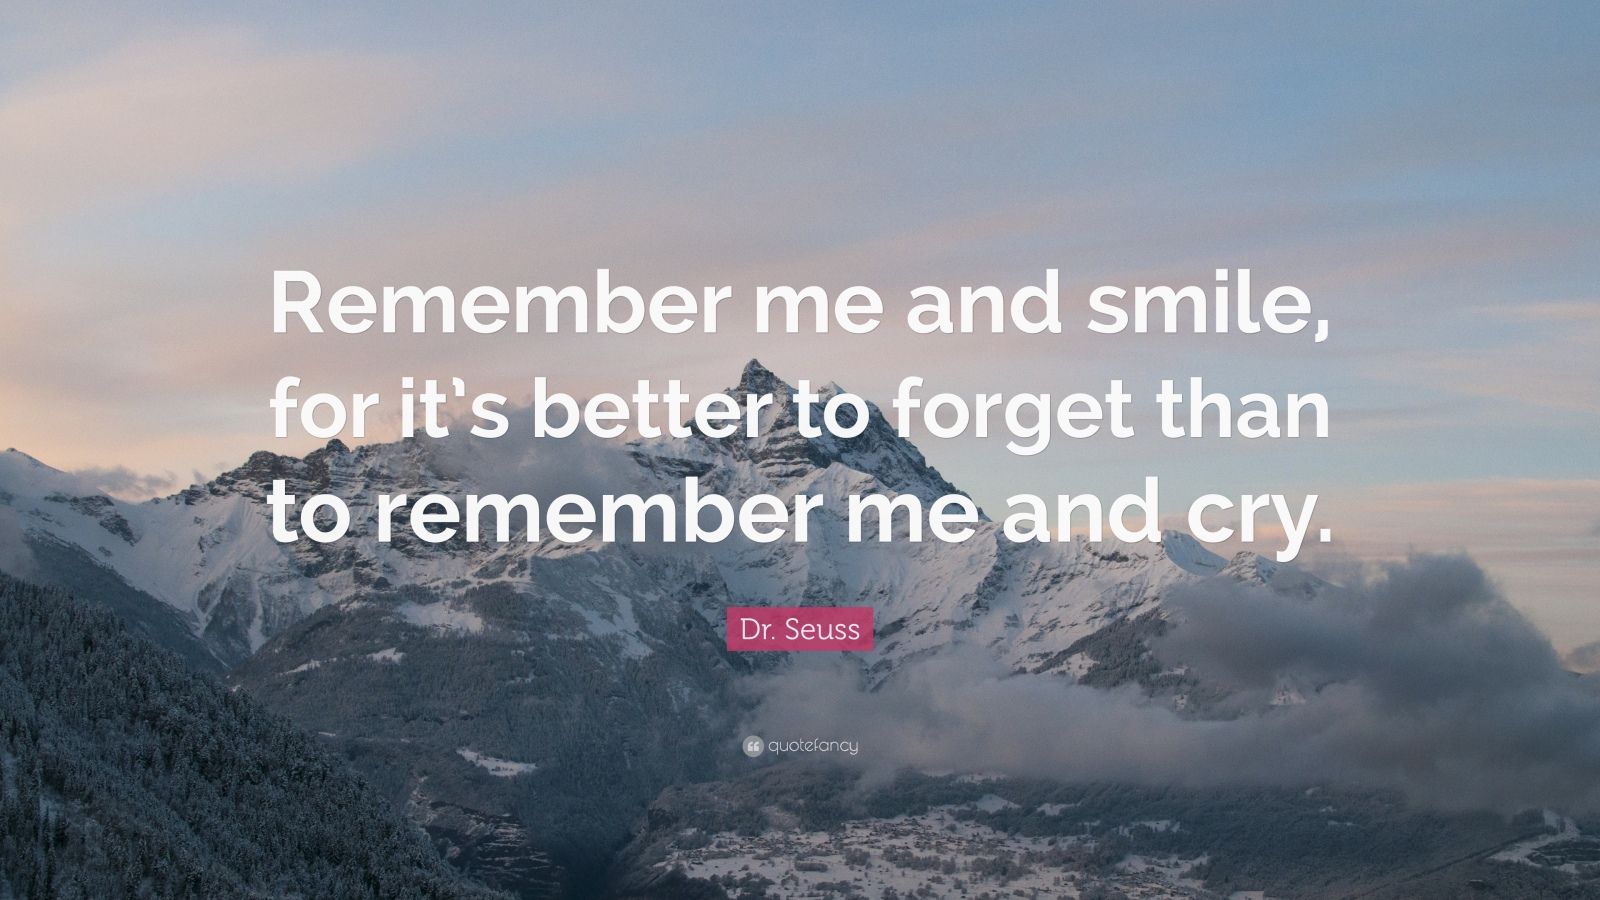 Dr. Seuss Quote: "Remember me and smile, for it's better to forget than to remember me and cry ...